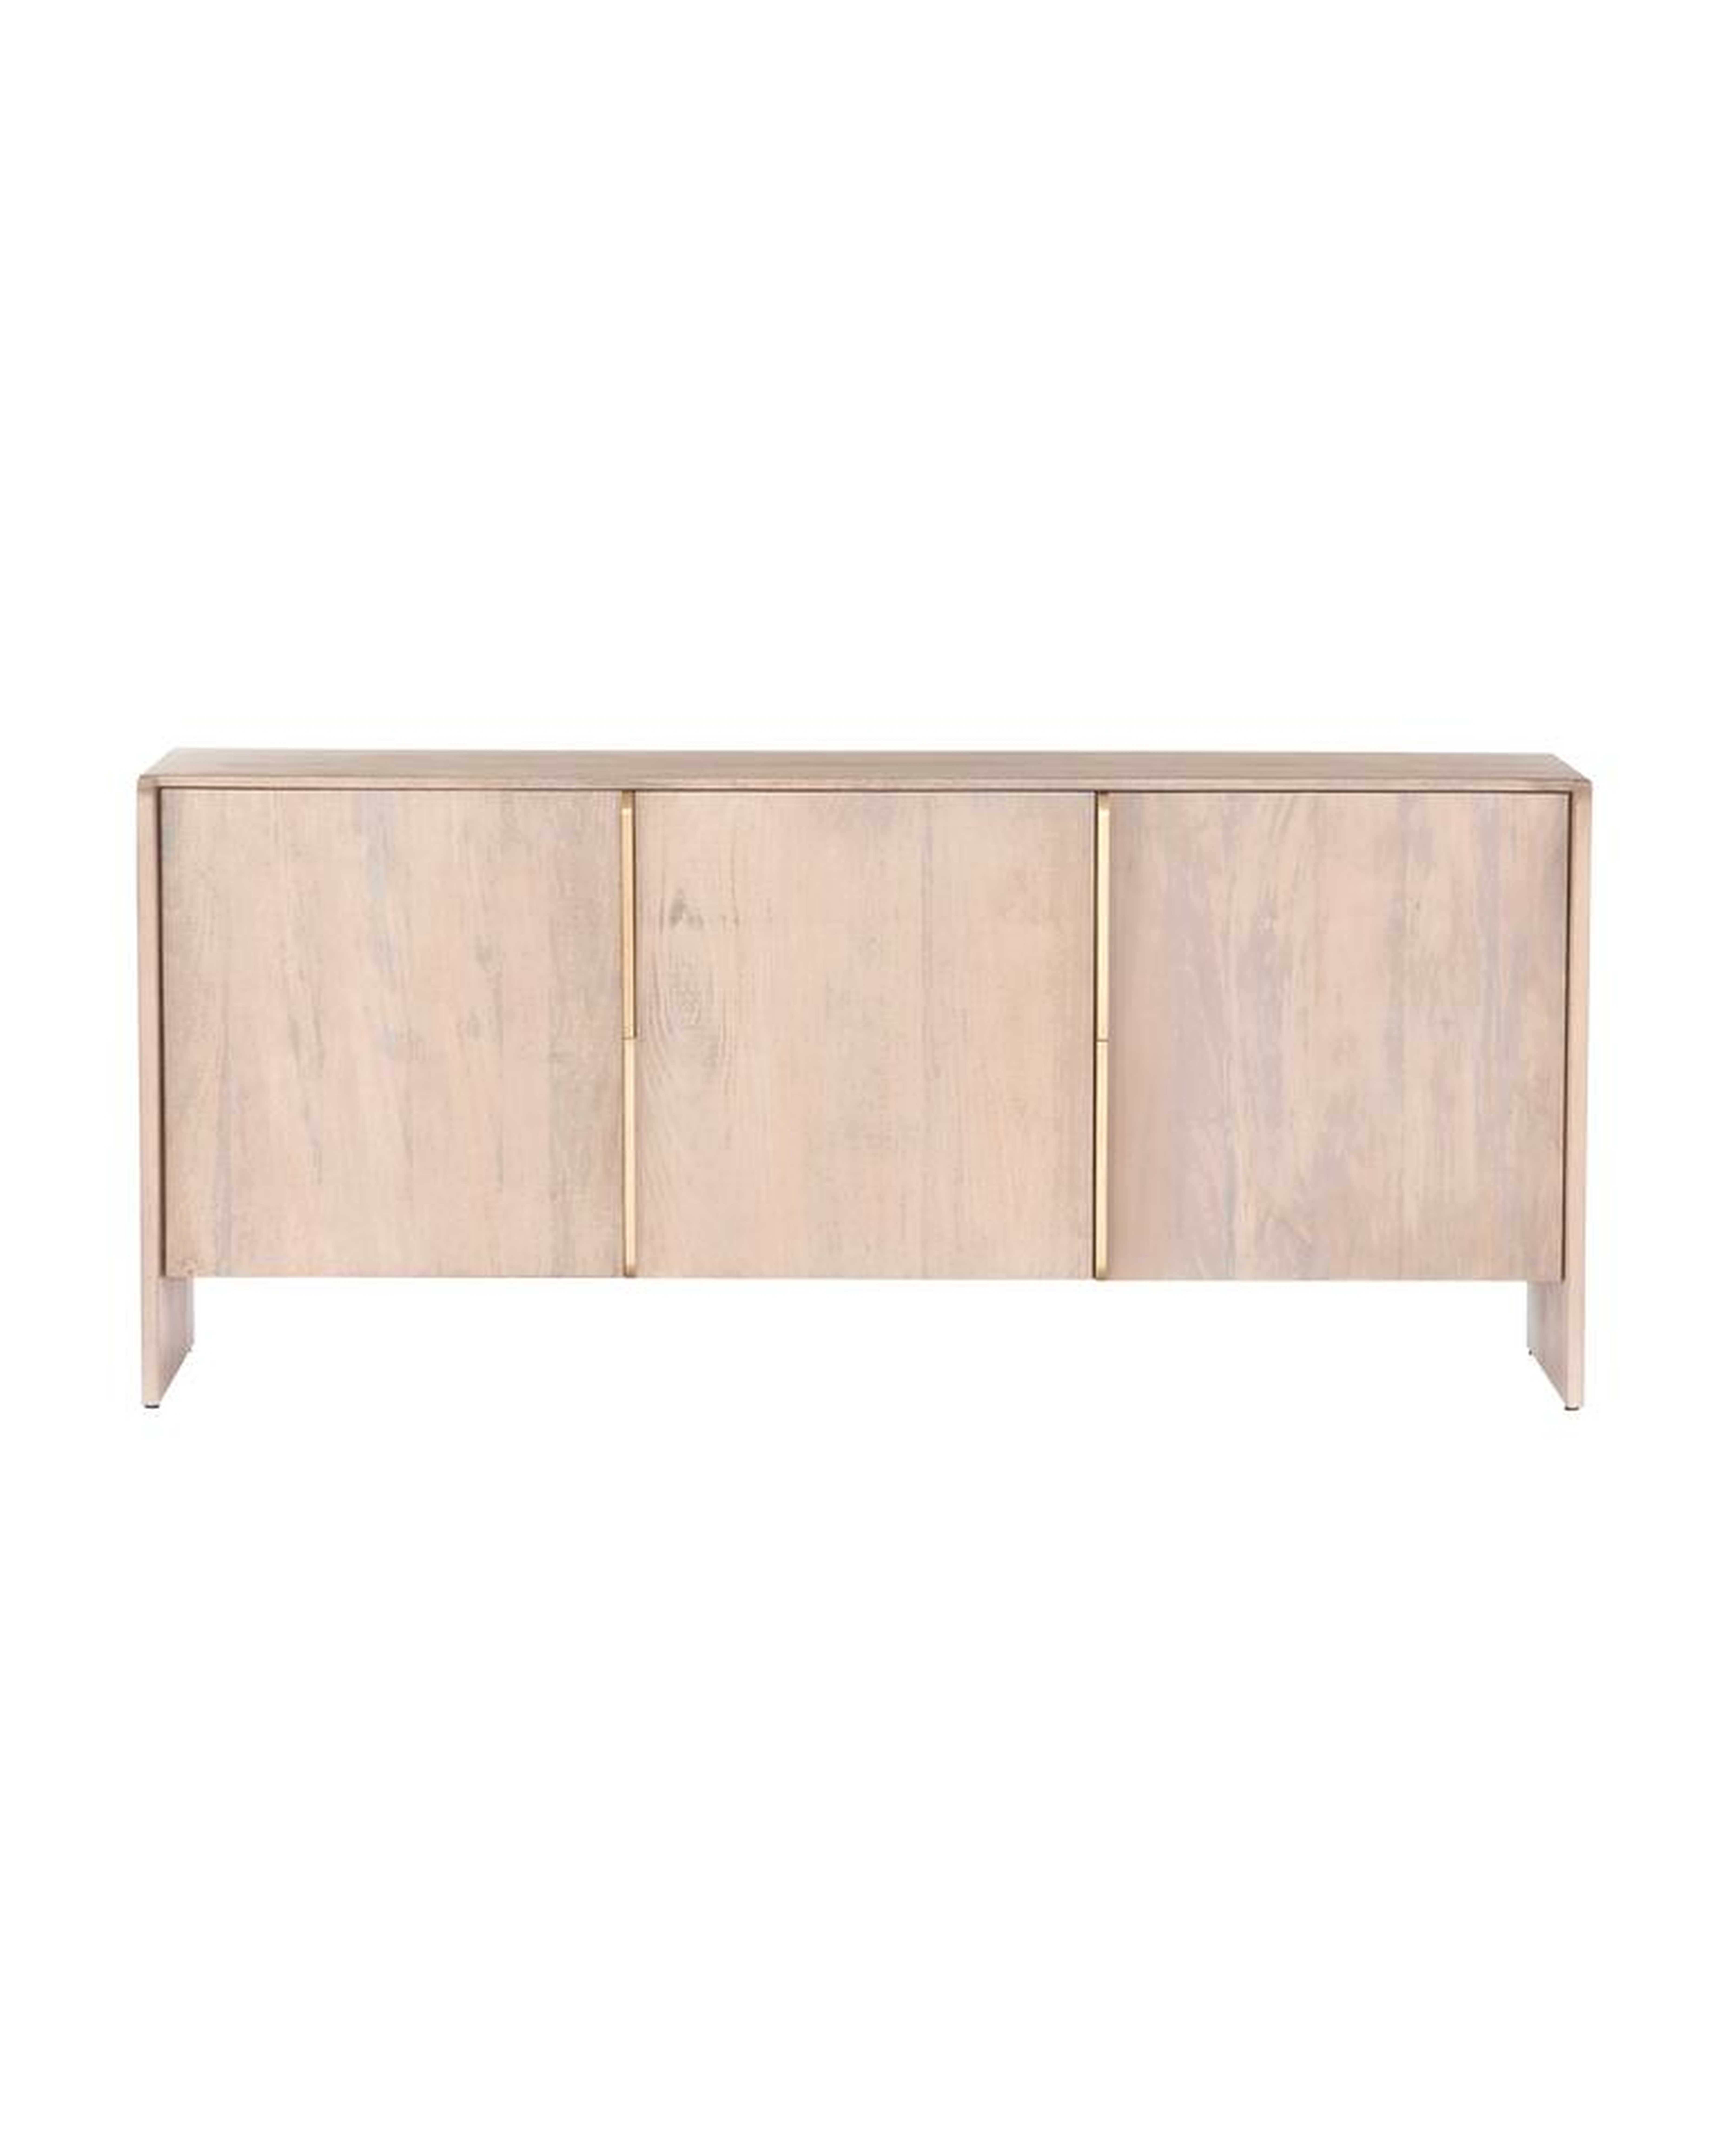 RORY SIDEBOARD - McGee & Co.